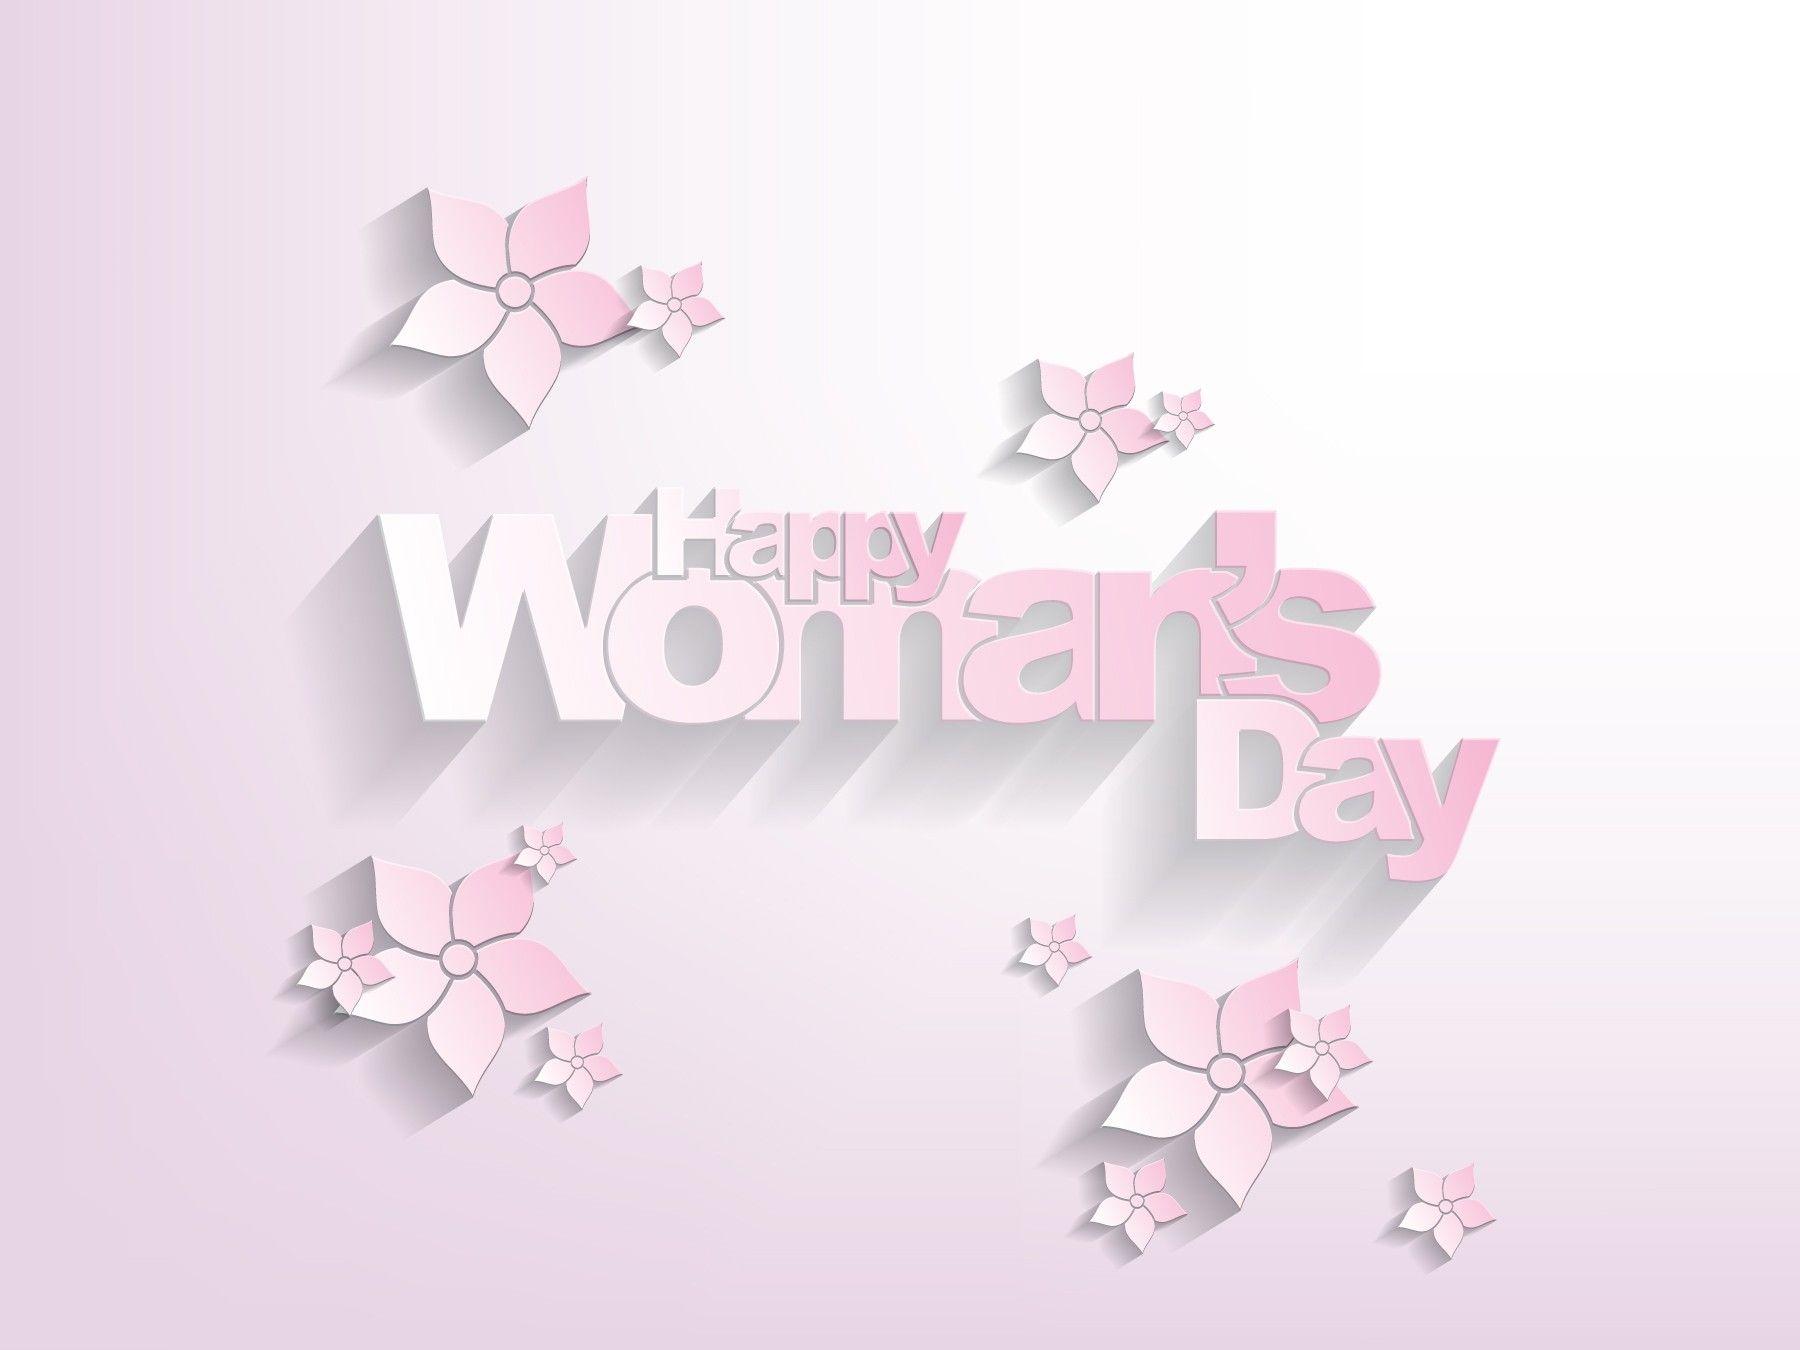 Happy woman's day with flowers on pink background. Ladies day